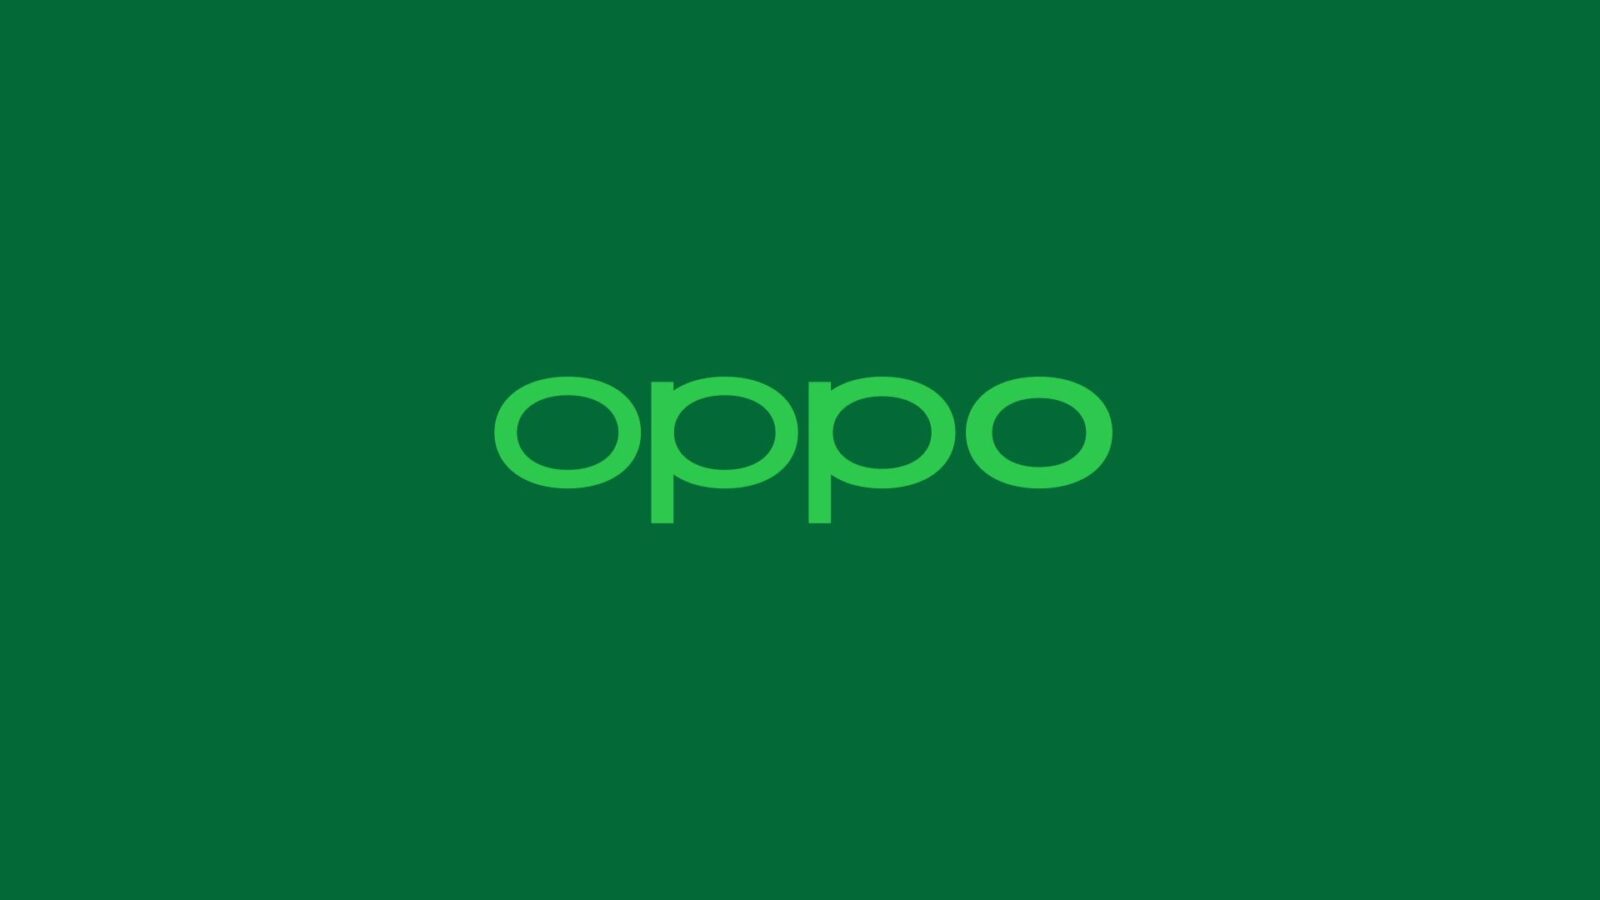 OPPO Launches 125W Flash Charge, 65W AirVOOC Wireless Flash Charge and 50W Mini SuperVOOC Charger